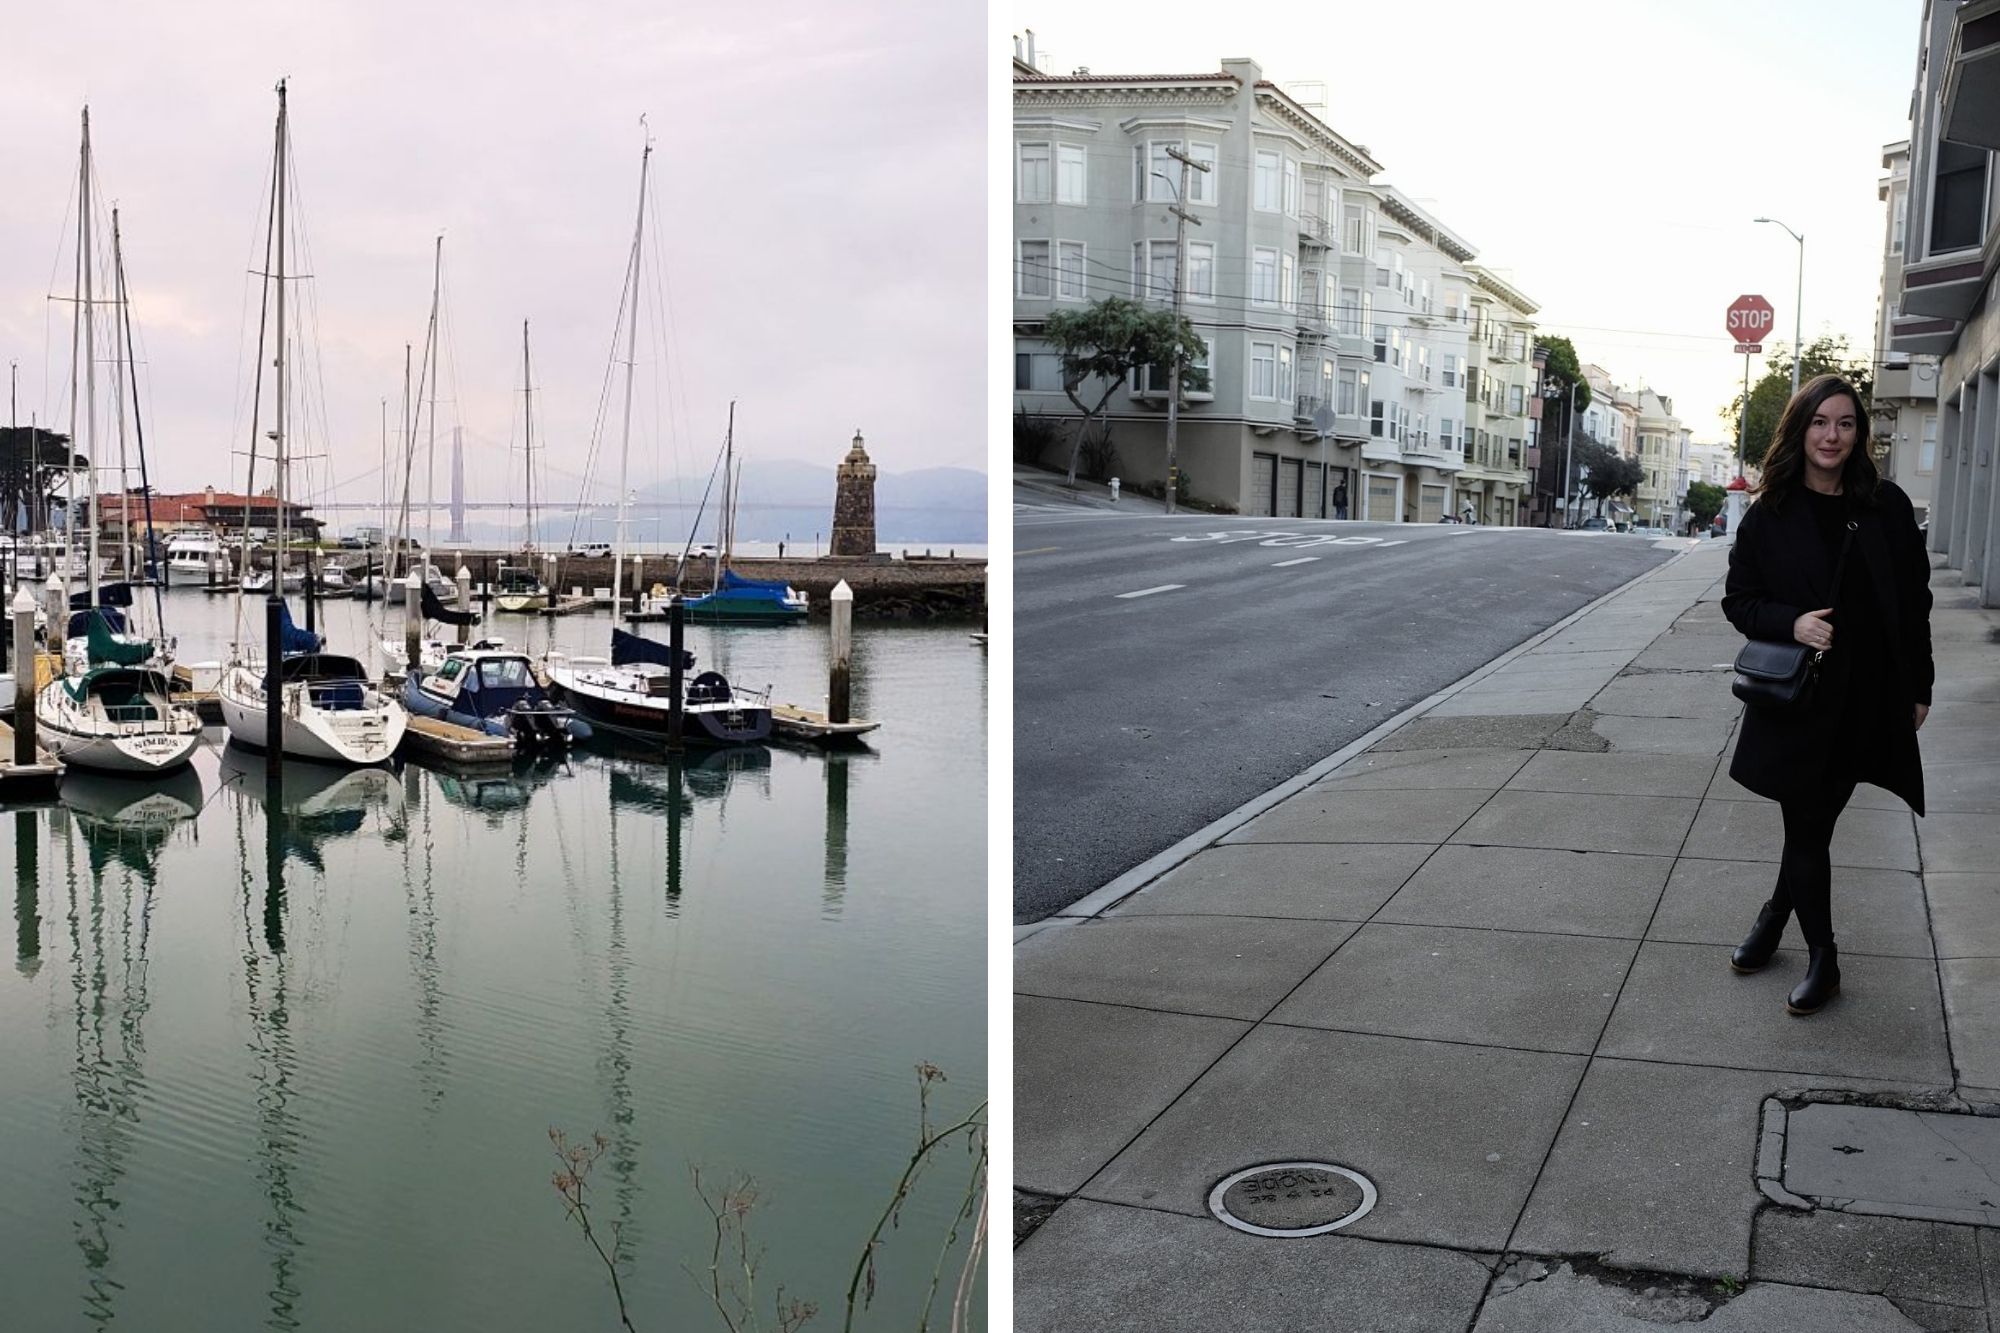 left: boats in the SF bay, right: Alyssa on the sidewalk, facing the camera